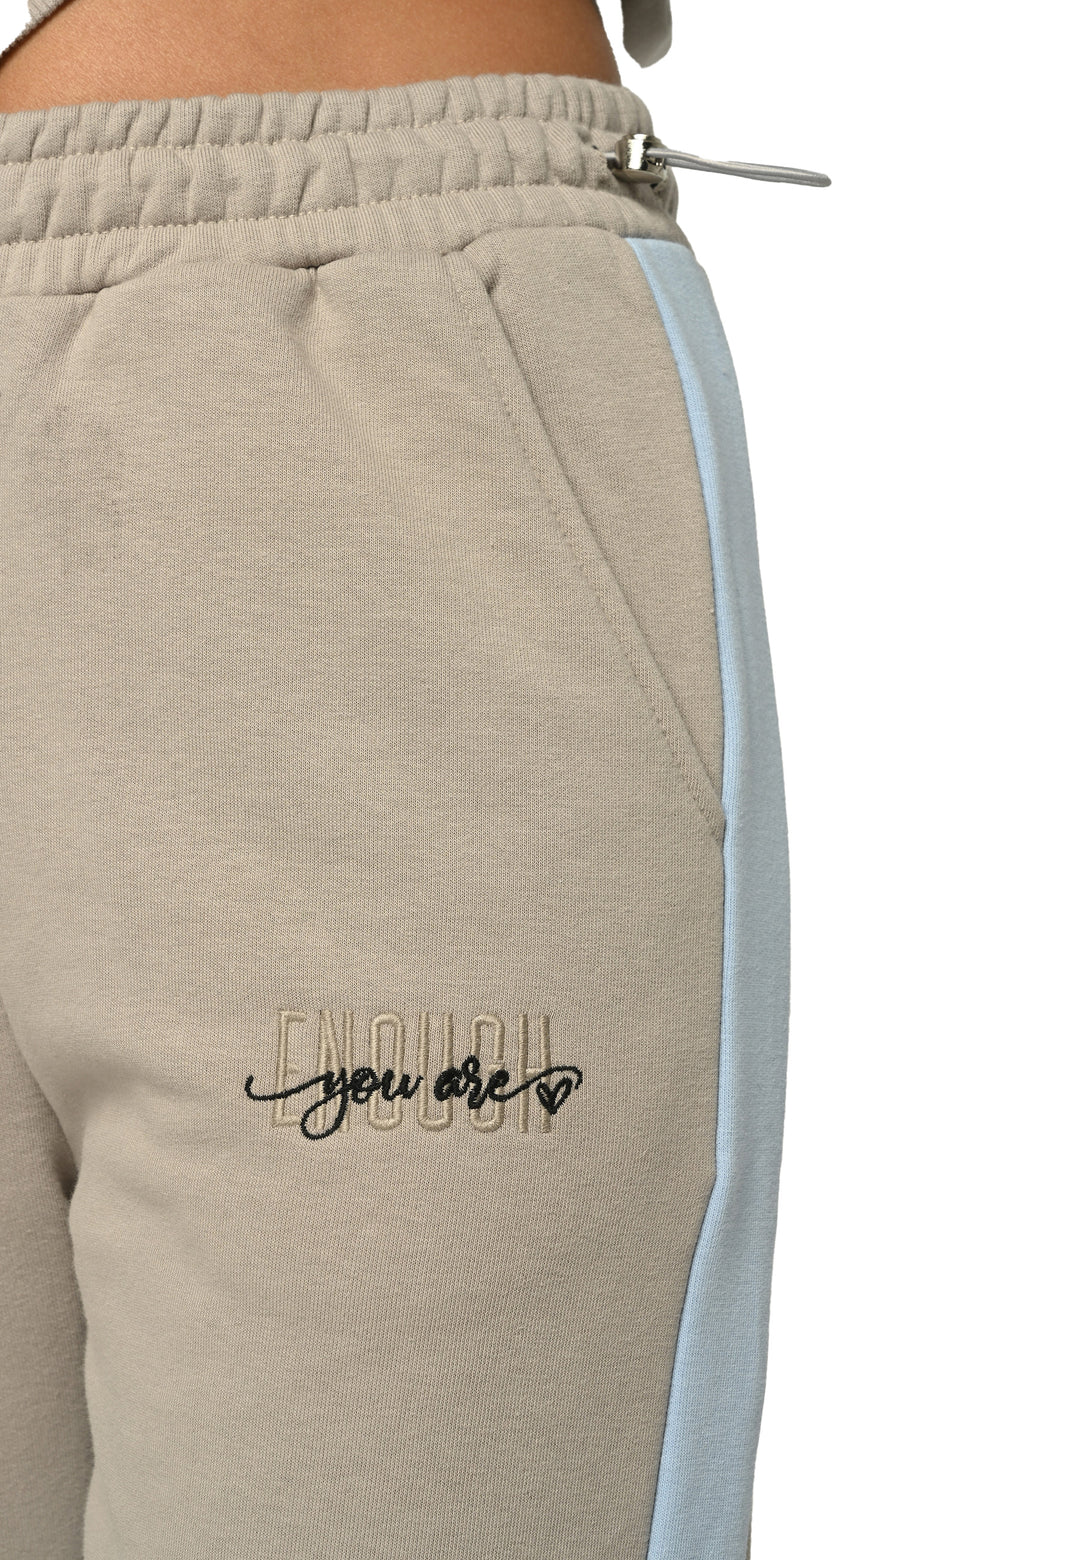 Tom Barron Ladies 'You Are Enough' Embroidered Tracksuit